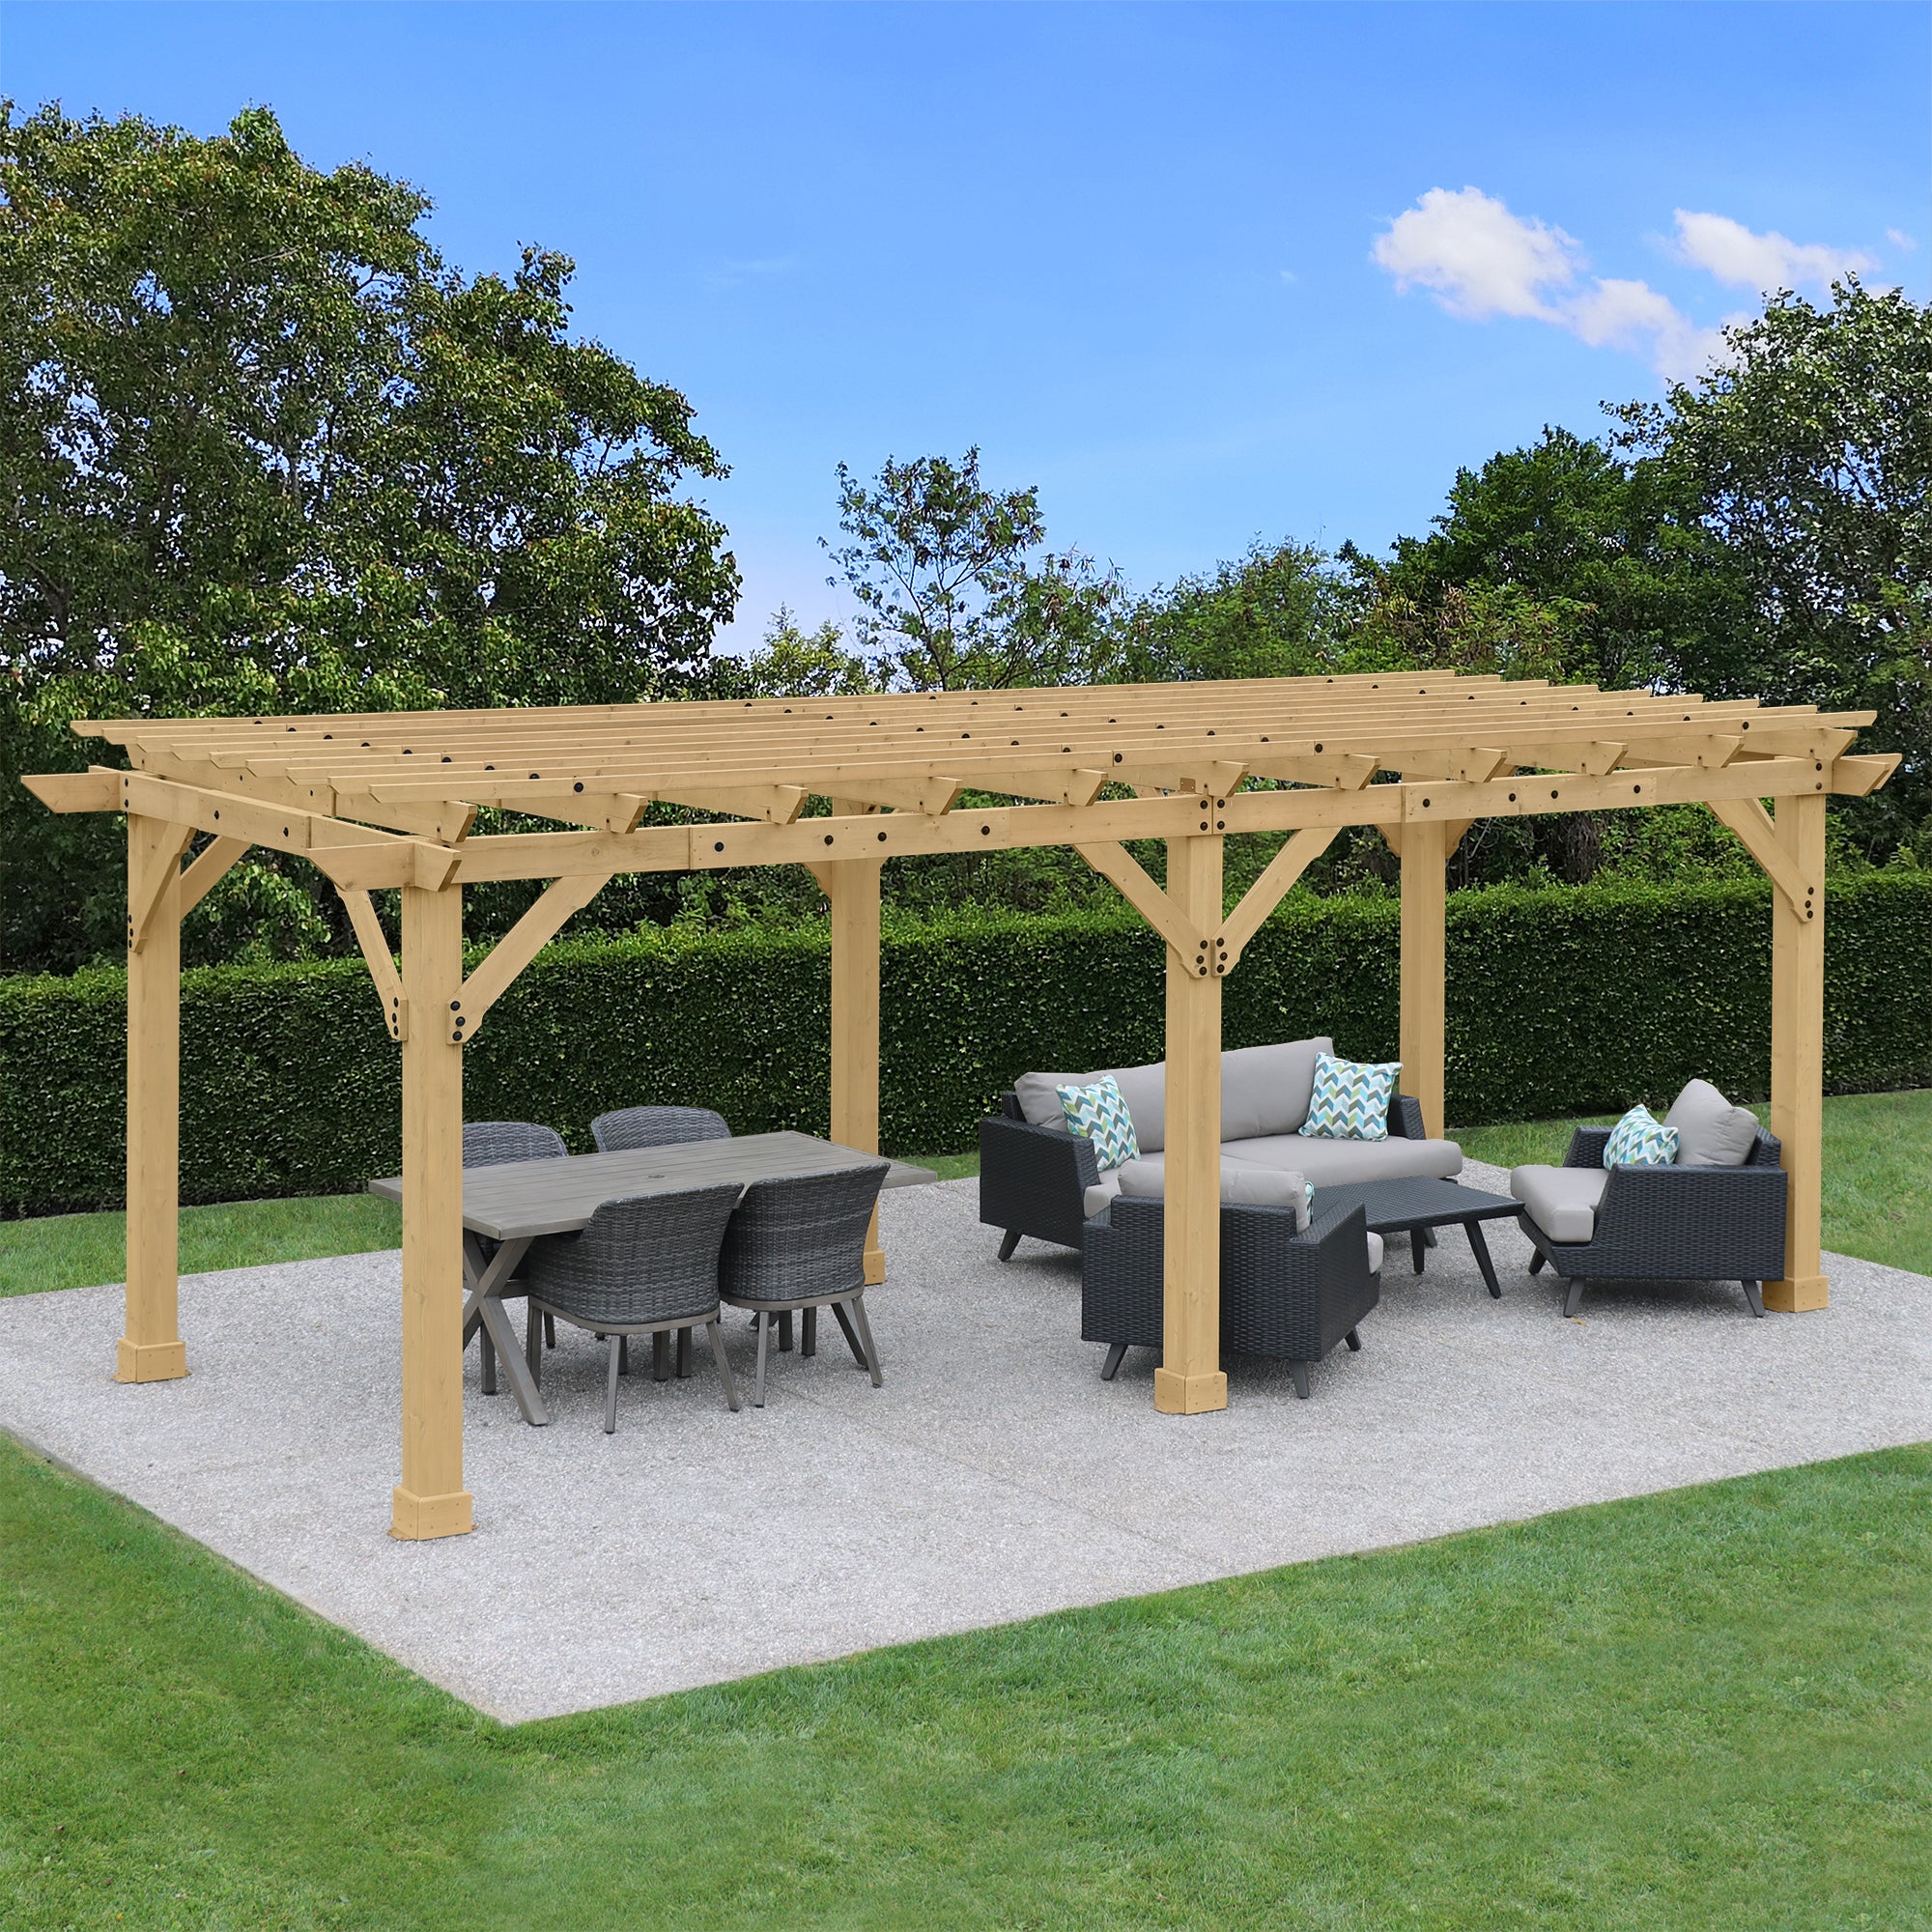 View from the top of the 10x22 Meridian Cedar Pergola with furniture under.